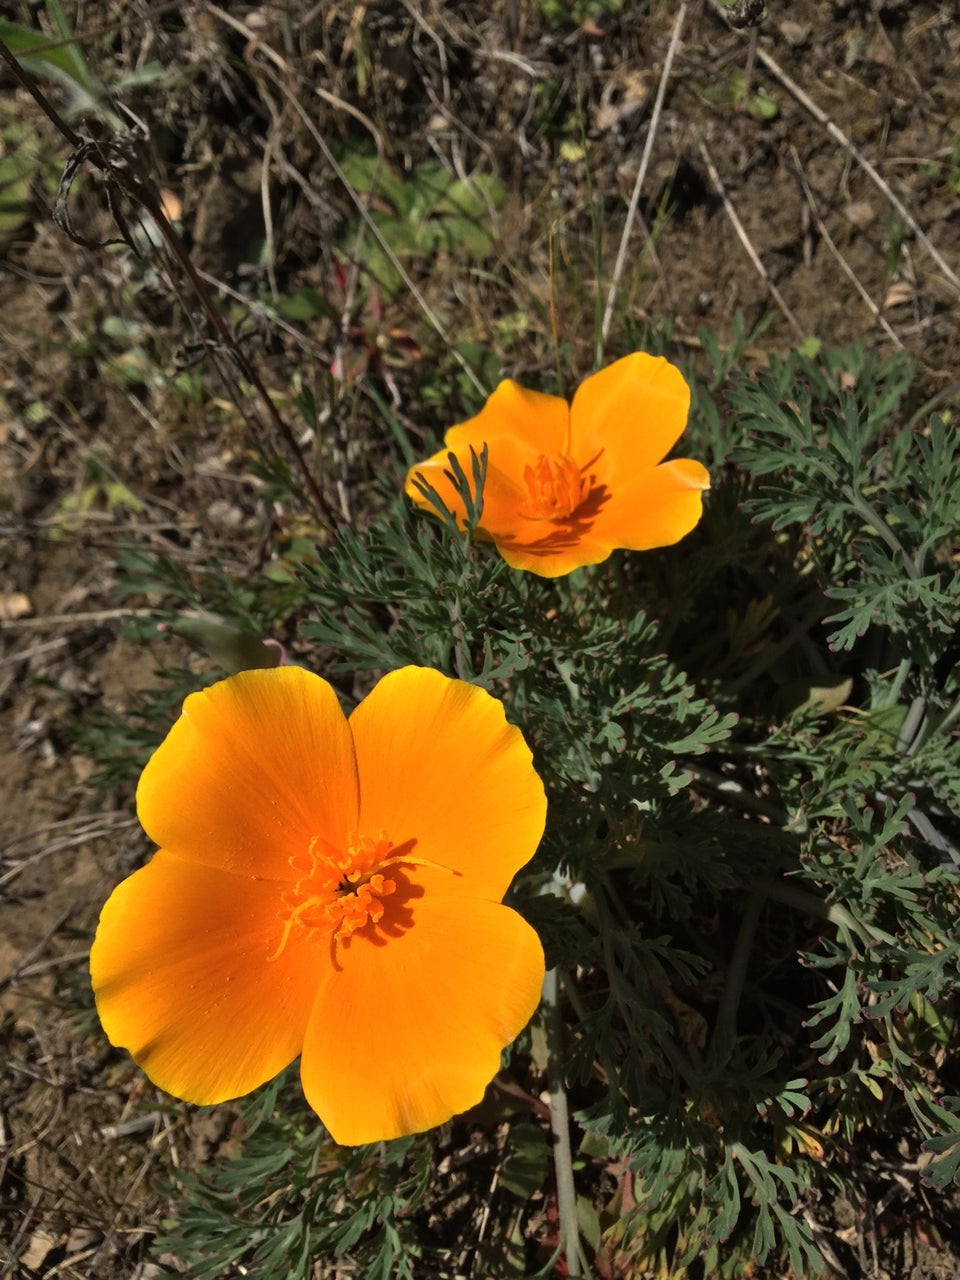 Two California golden state poppies brightly lit by the sun, casting shadows on their plant, sparse other plants in the dirt in the background.